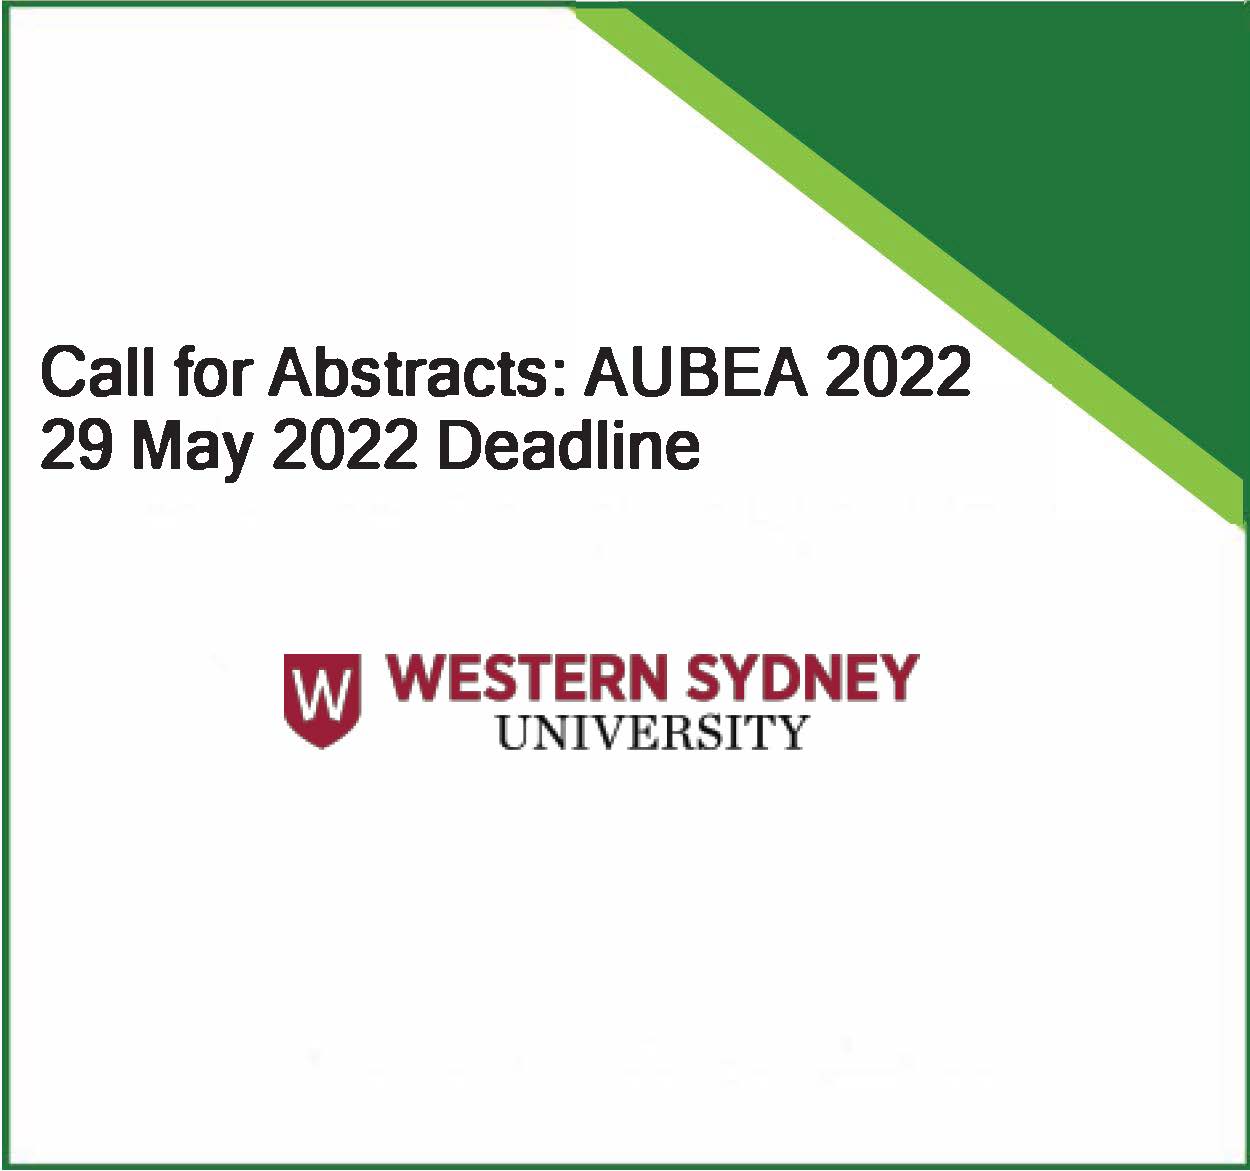 Call for Abstracts: AUBEA 2022